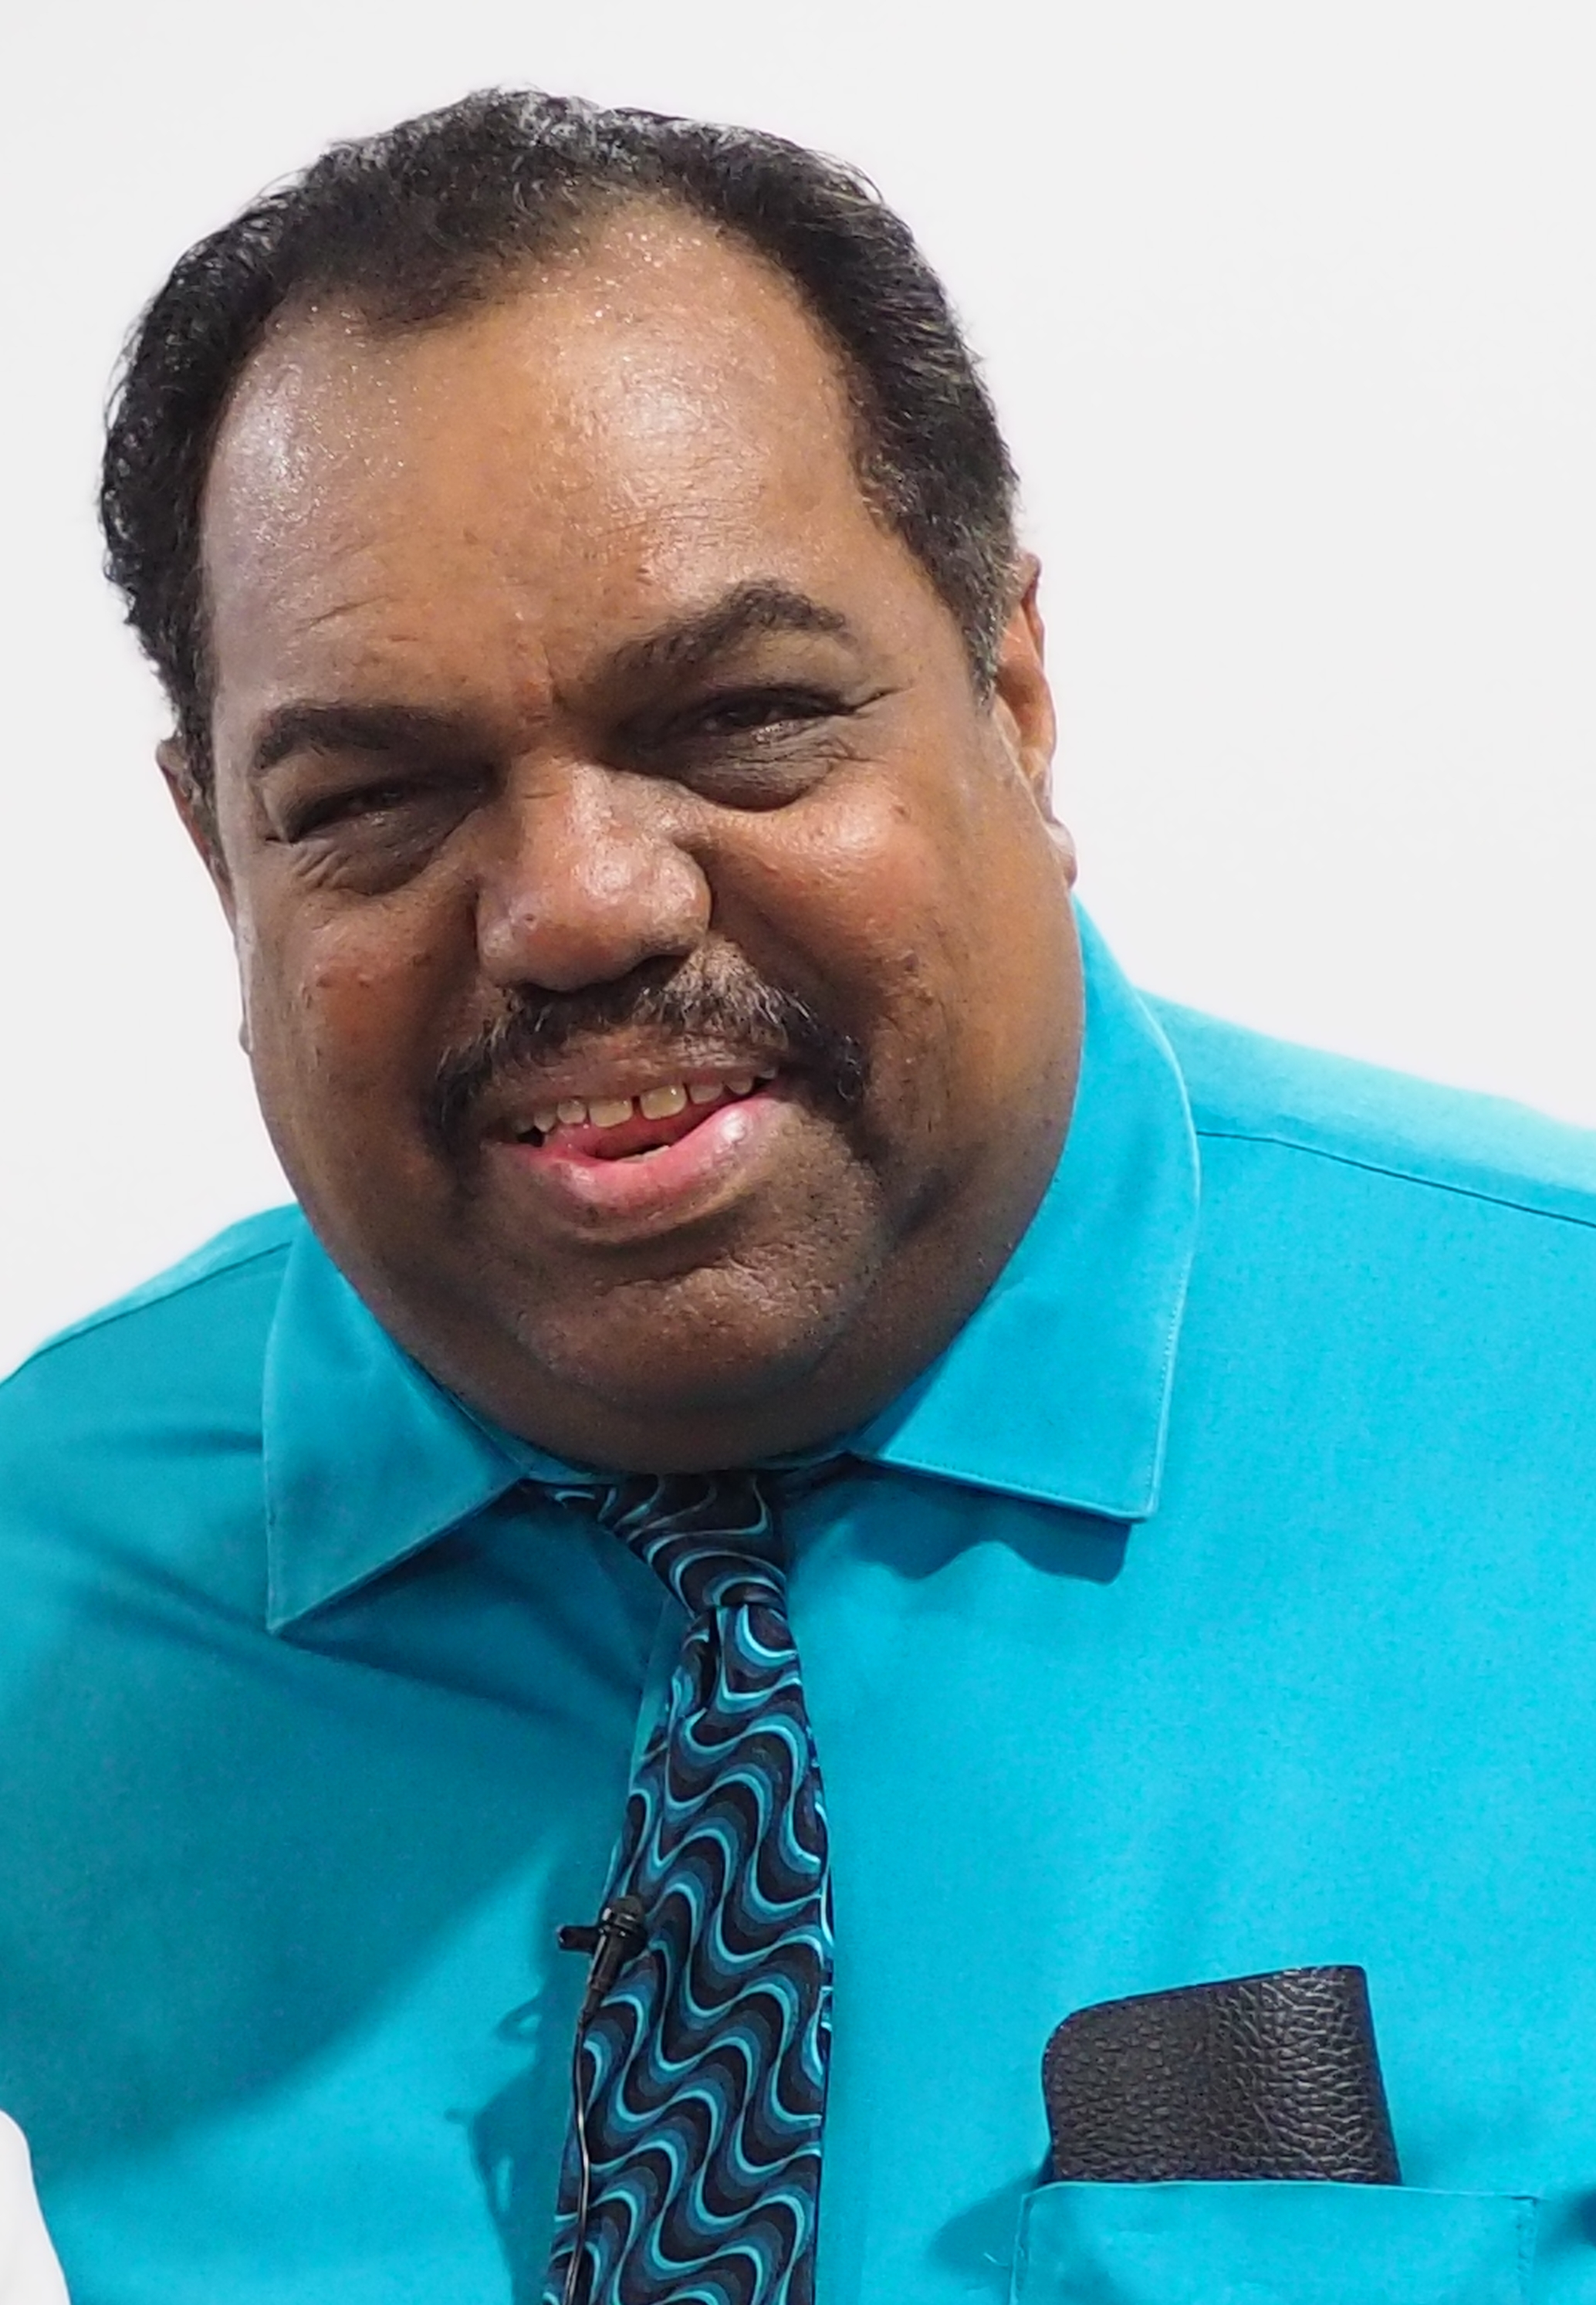 Face to face with Daryl Davis about talking with racists